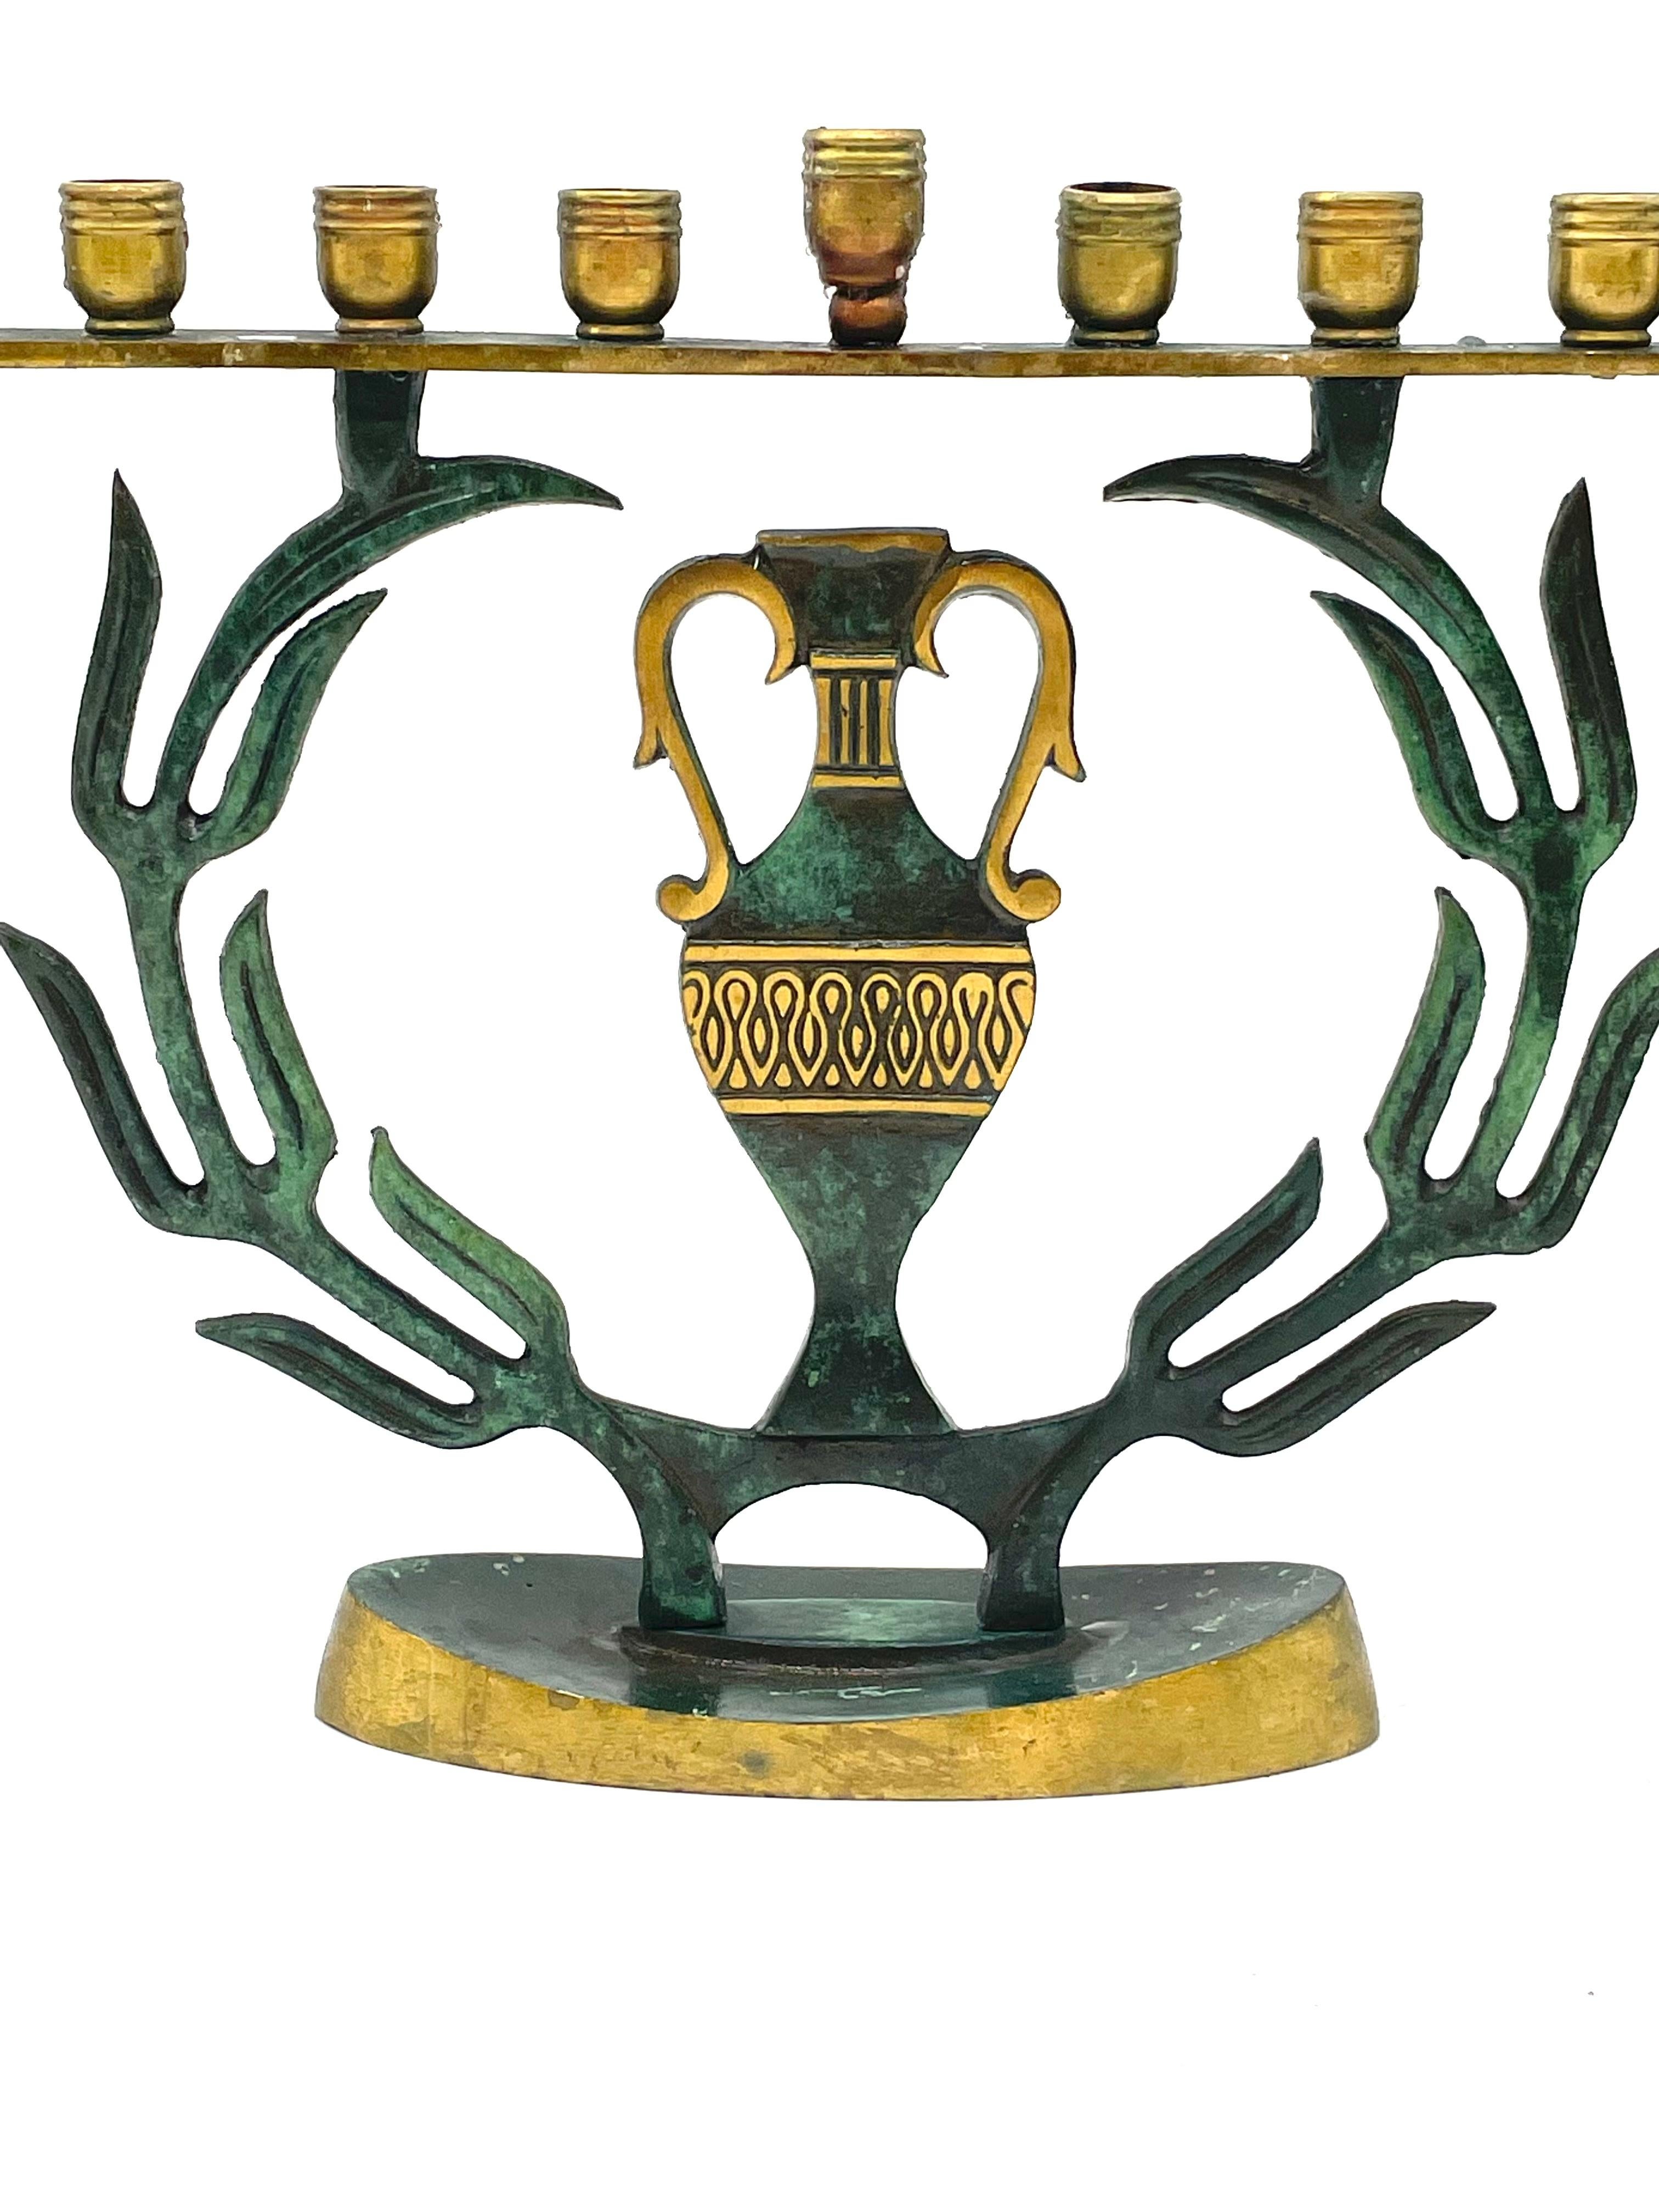 Cast brass made in Israel, circa 1950. Cast brass with green patina overlay. Jar in the middle depicts stylized patterns with gilded accents between two olive branches.
Marked on the bottom 